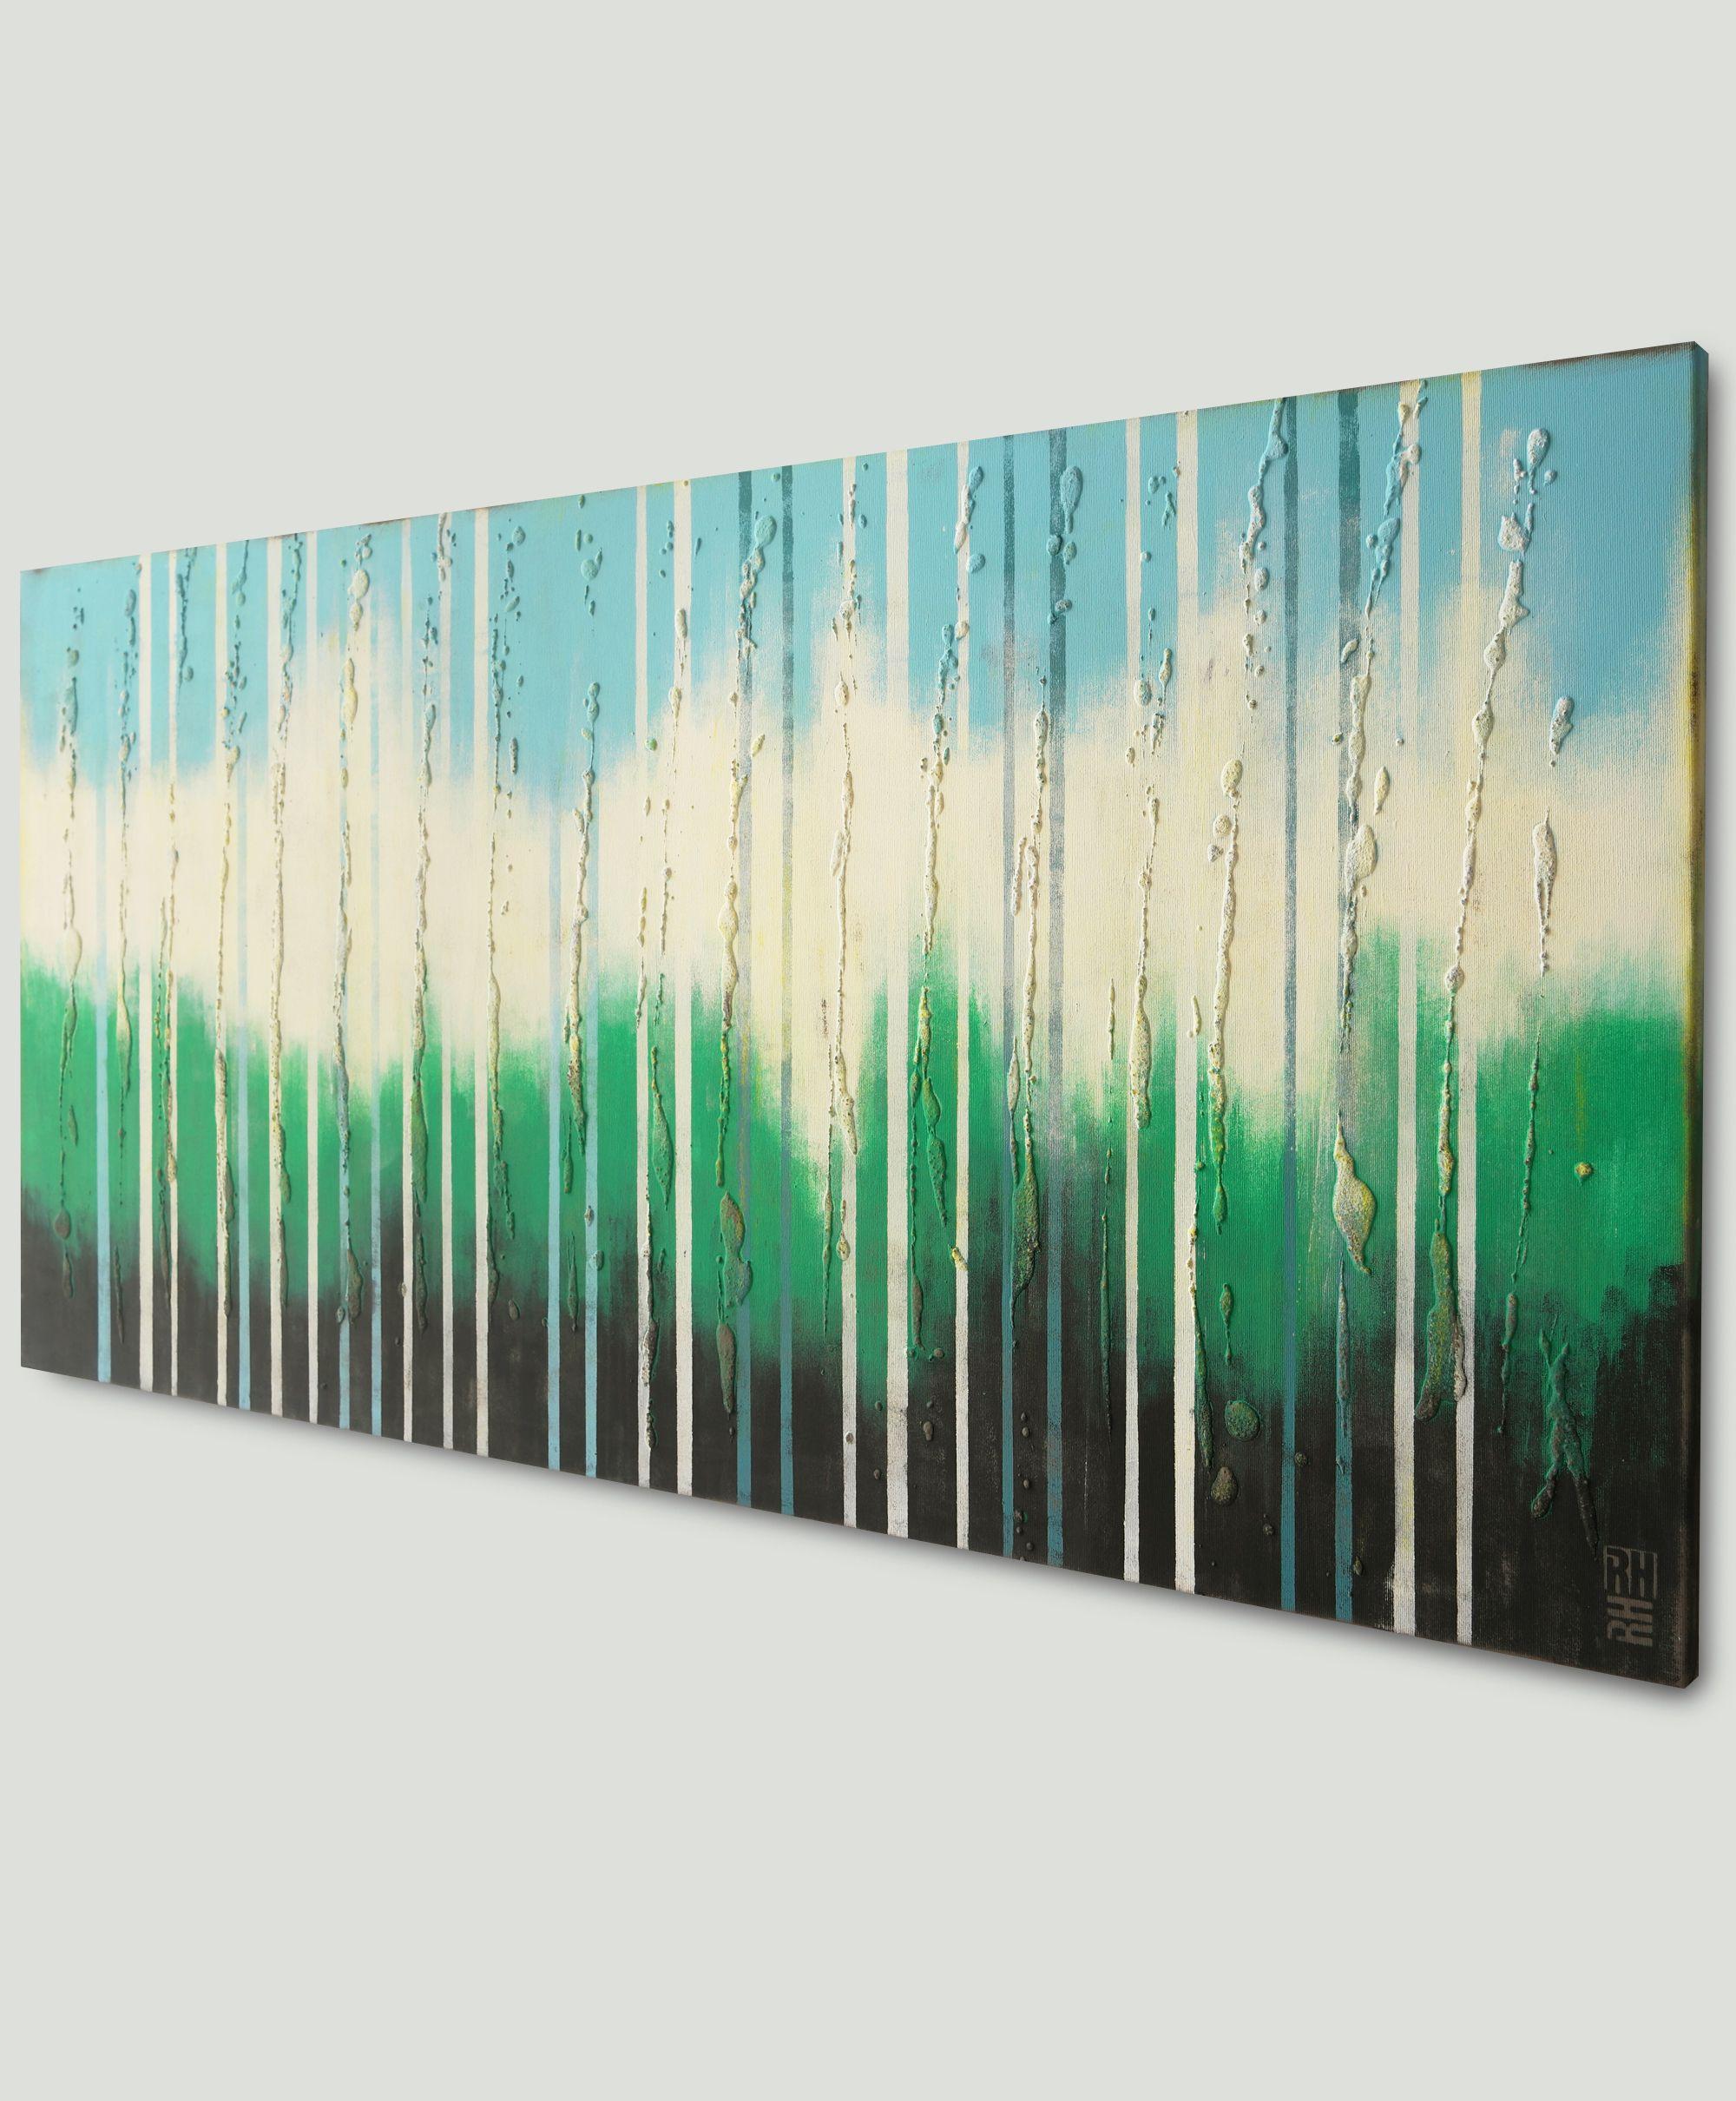 Acrylic Abstract Painting, Original artwork created by Ronald Hunter.    White gradually transitions into deep green hues, evoking a sense of depth, of being submerged. Layers of acrylic paint and texture give the painting an interesting twist. This